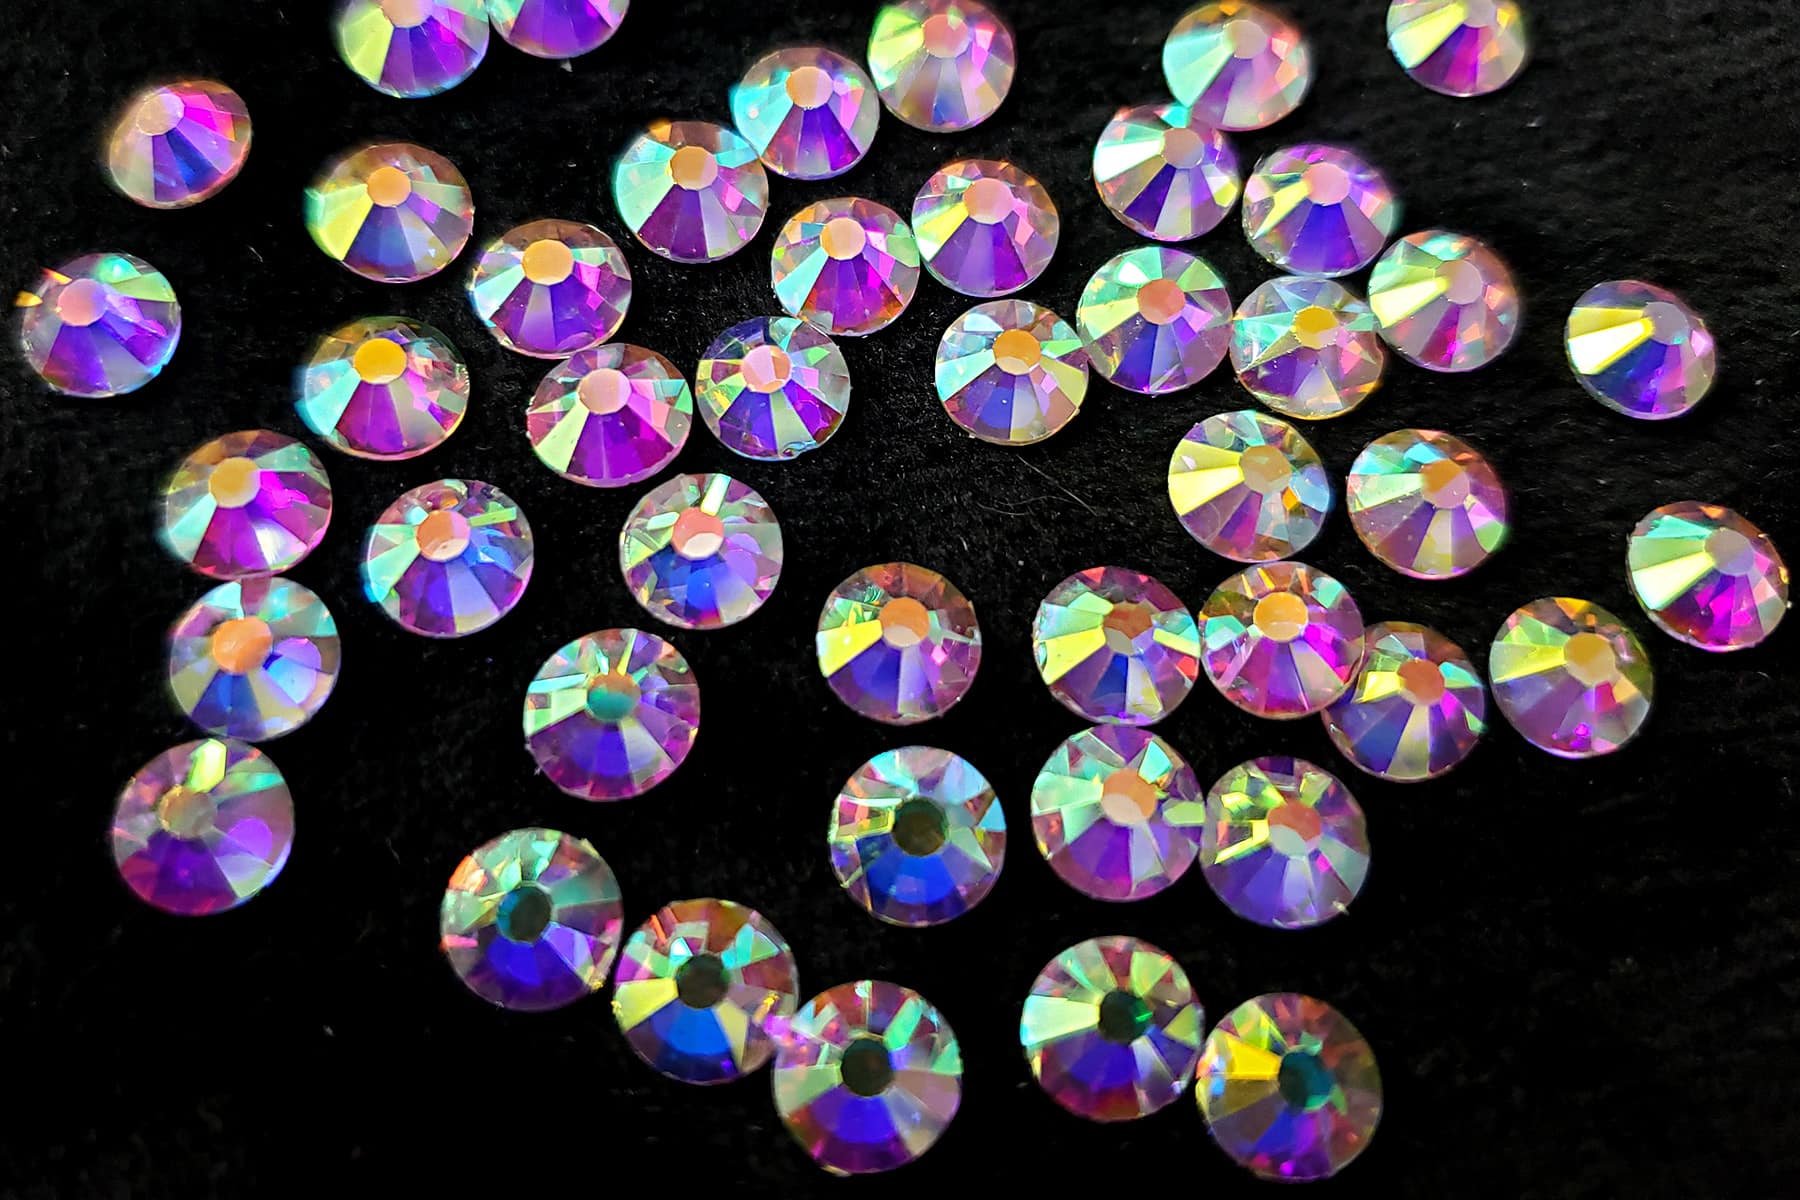 A large pile of iridescent rhinestones against a black background.